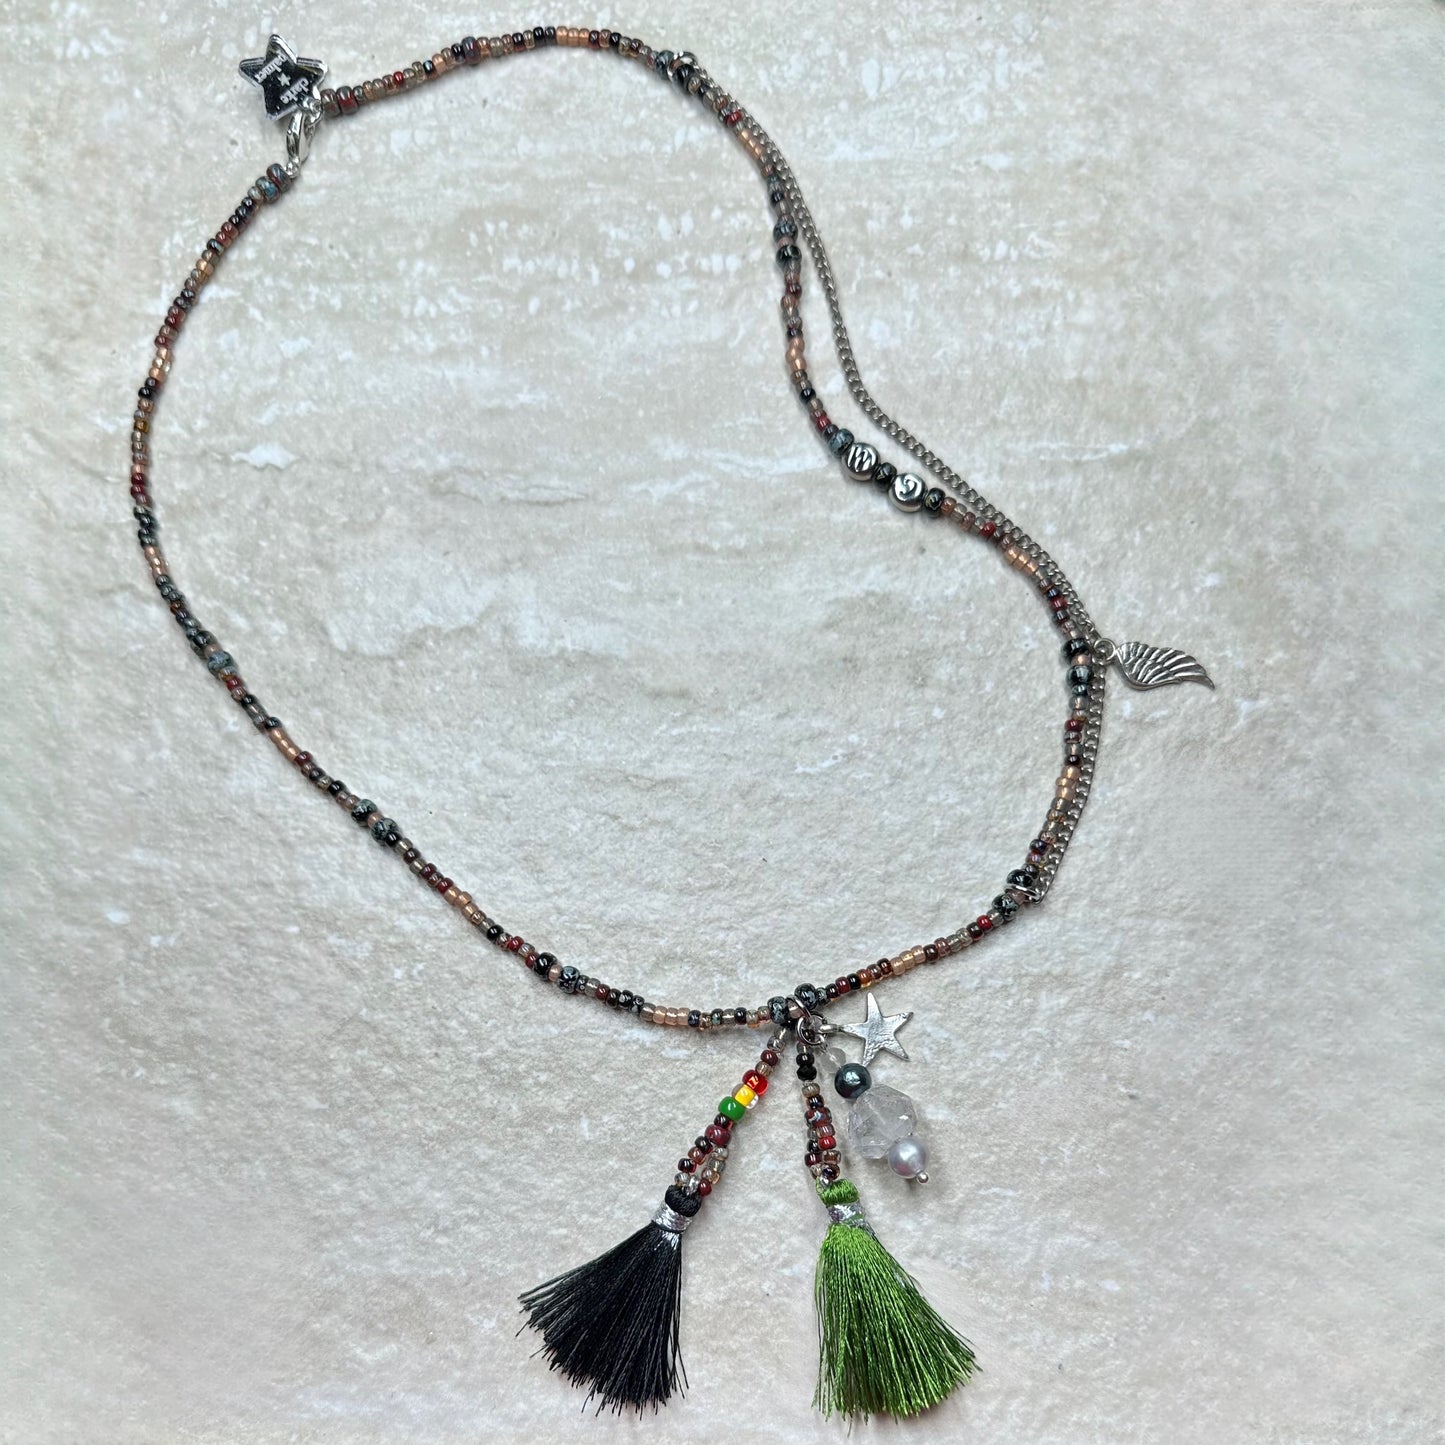 Picasso Beaded Tassel Charm Necklaces for